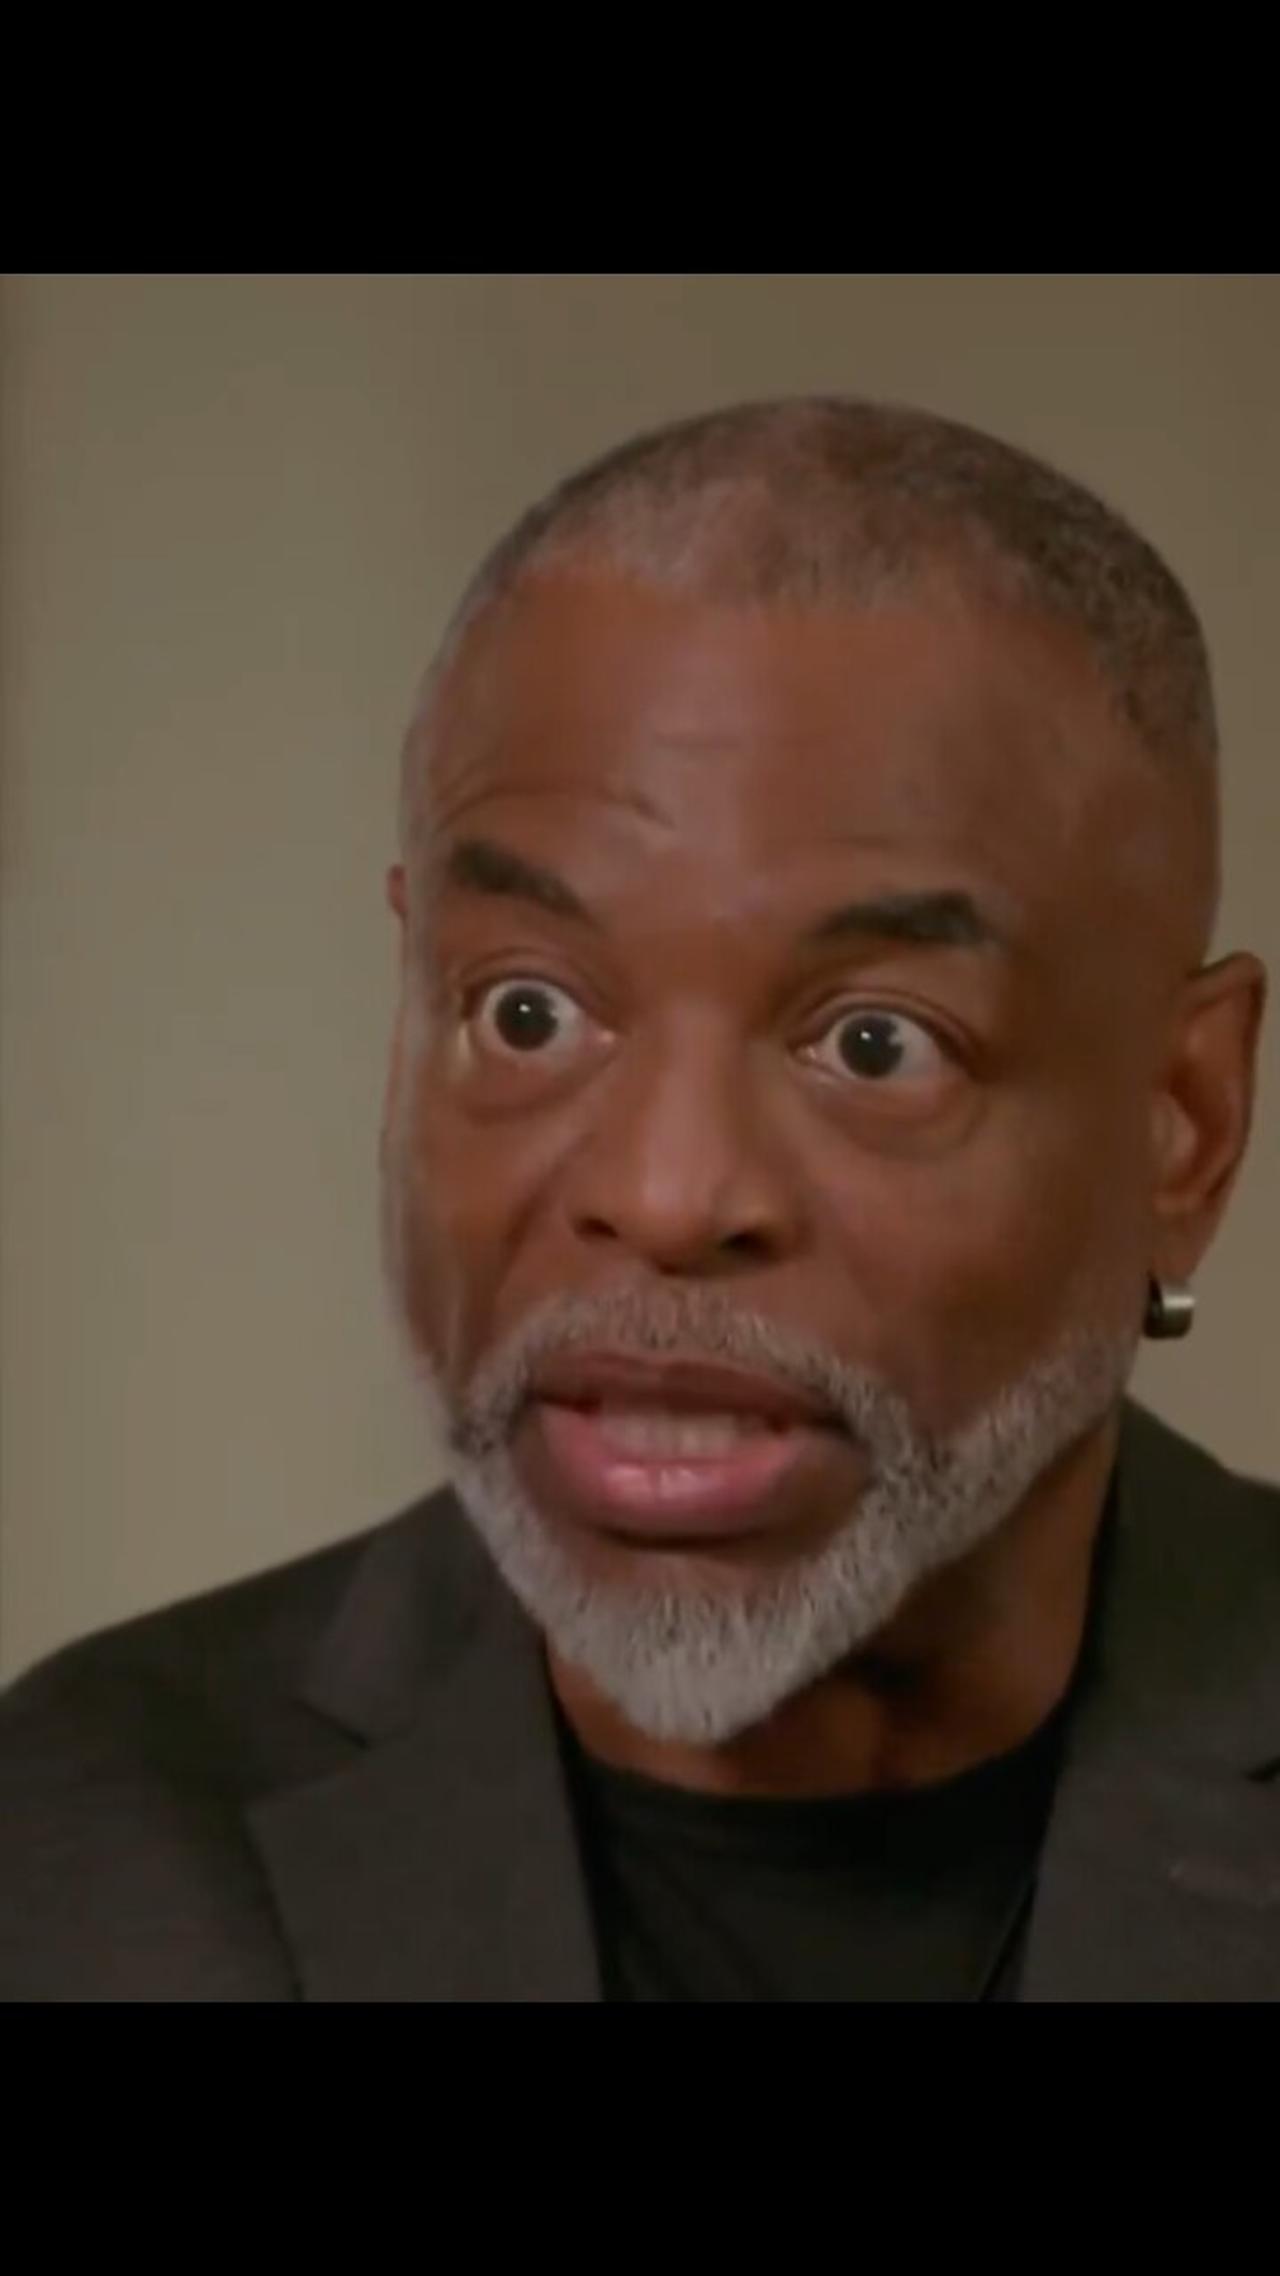 LeVar Burton Shocked His Great-Great-Grandfather Was A White Confederate Soldier